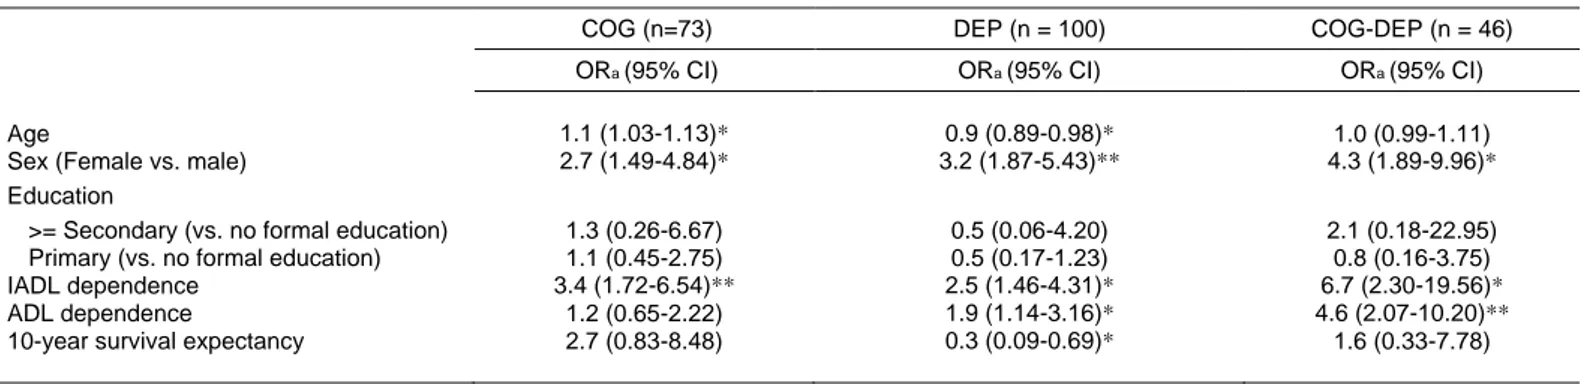 Table 4 Multinomial logistic regression model predicting the effect of functional limitation and survival expectancy, as a function of medical comorbidities, on  cognitive impairment (COG), depressive symptoms (DEP), and both coexisting (COG-DEP), adjustin